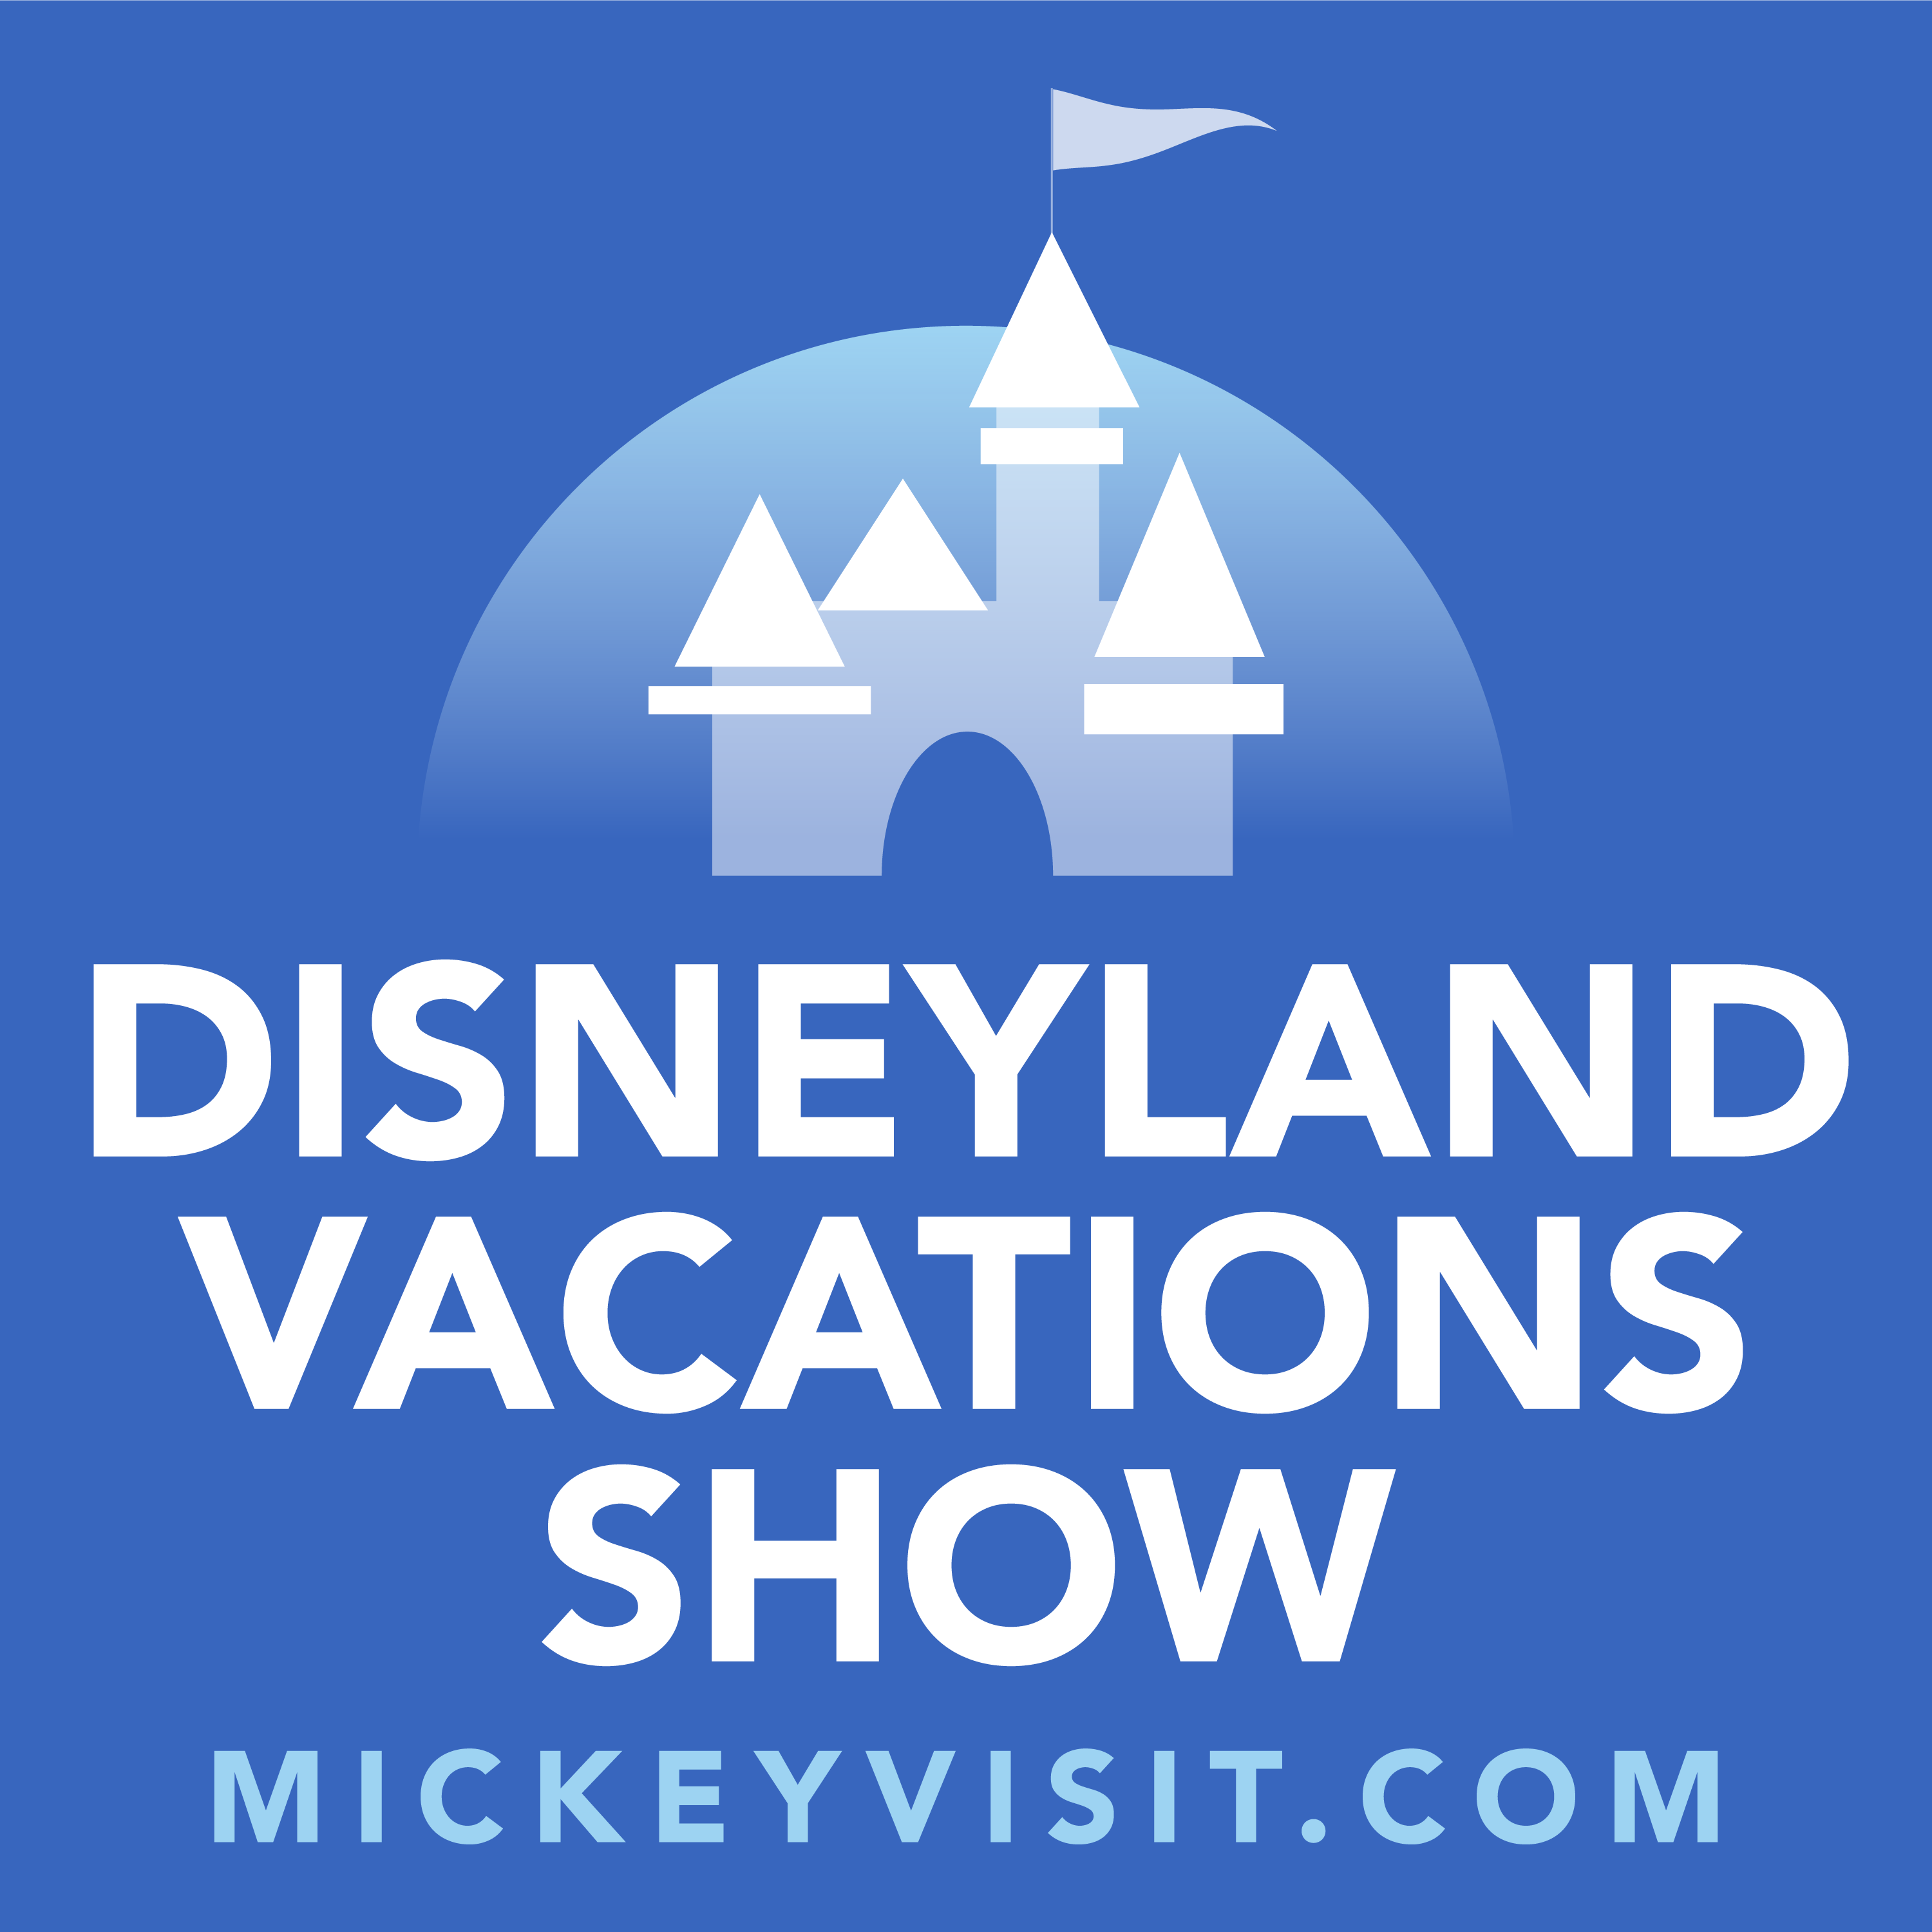 Disneyland Vacations Show: Save Money, Experience More